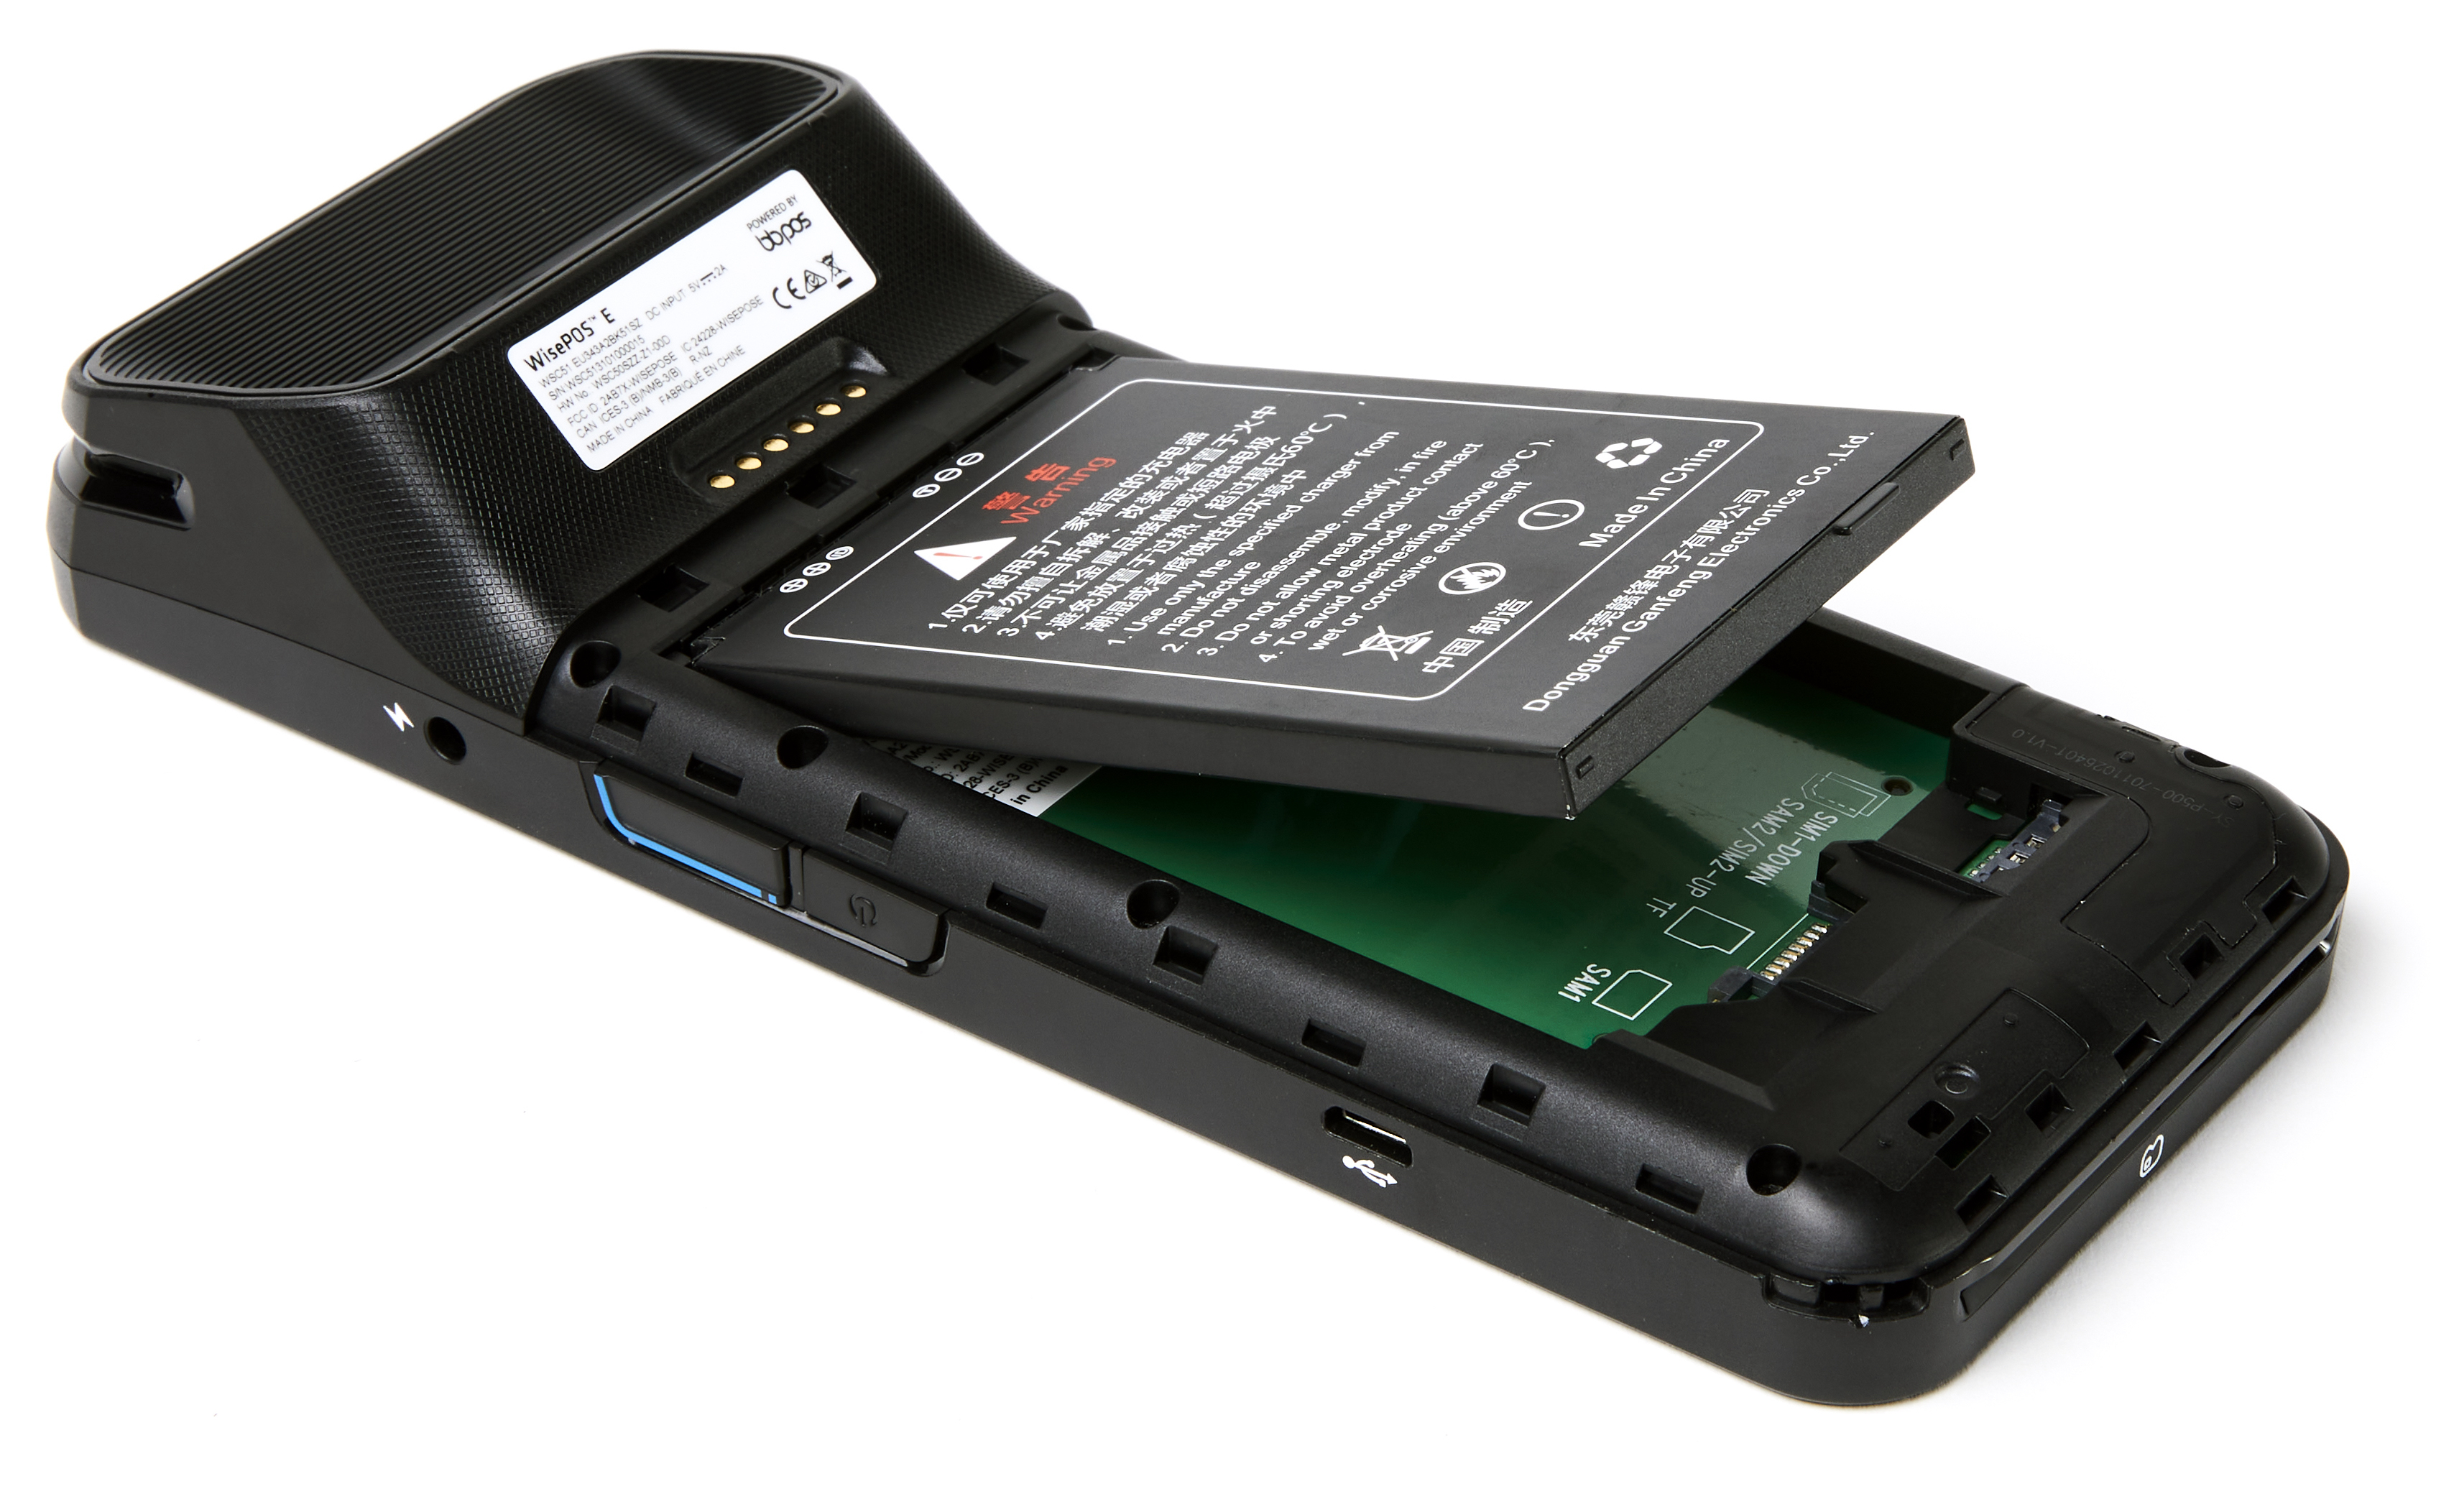 Illustration of the WisePOS e. The back panel has been removed and a battery pack is shown being inserted.